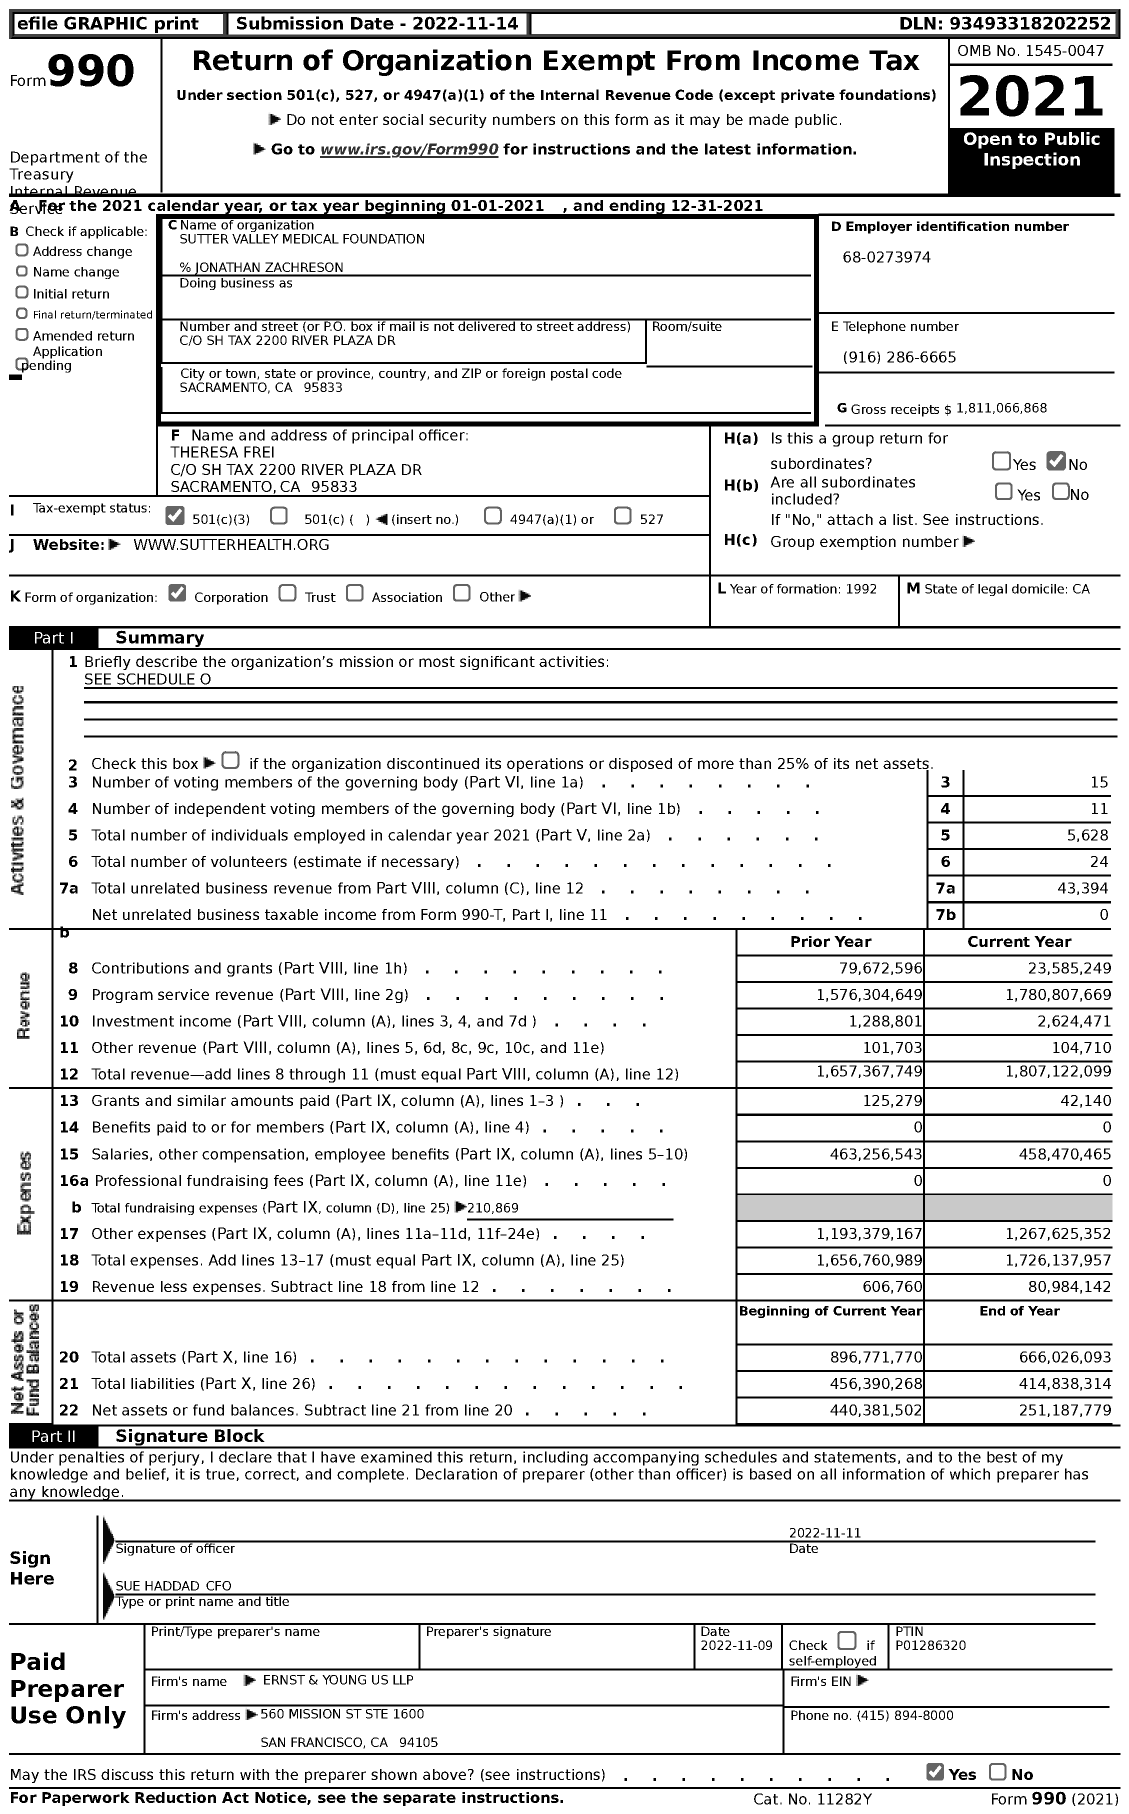 Image of first page of 2021 Form 990 for Sutter Medical Foundation (SMF)